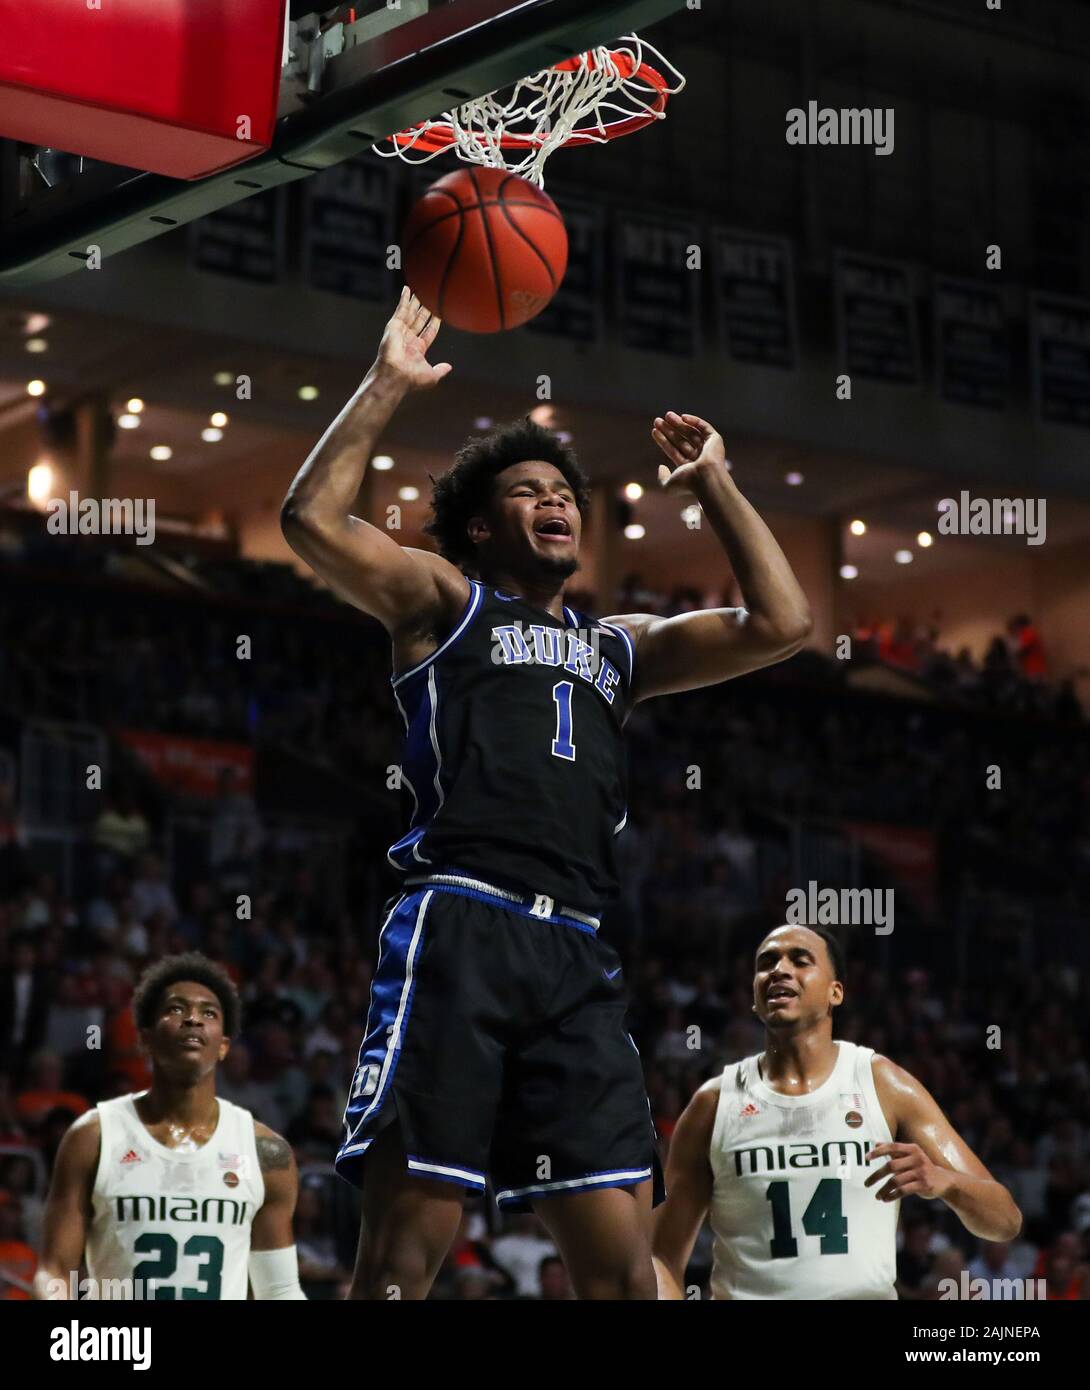 January 04, 2020: Duke Blue Devils center Vernon Carey Jr. (1) dunks the ball during the first half of an NCAA men's basketball game against the Miami Hurricanes at the Watsco Center in Coral Gables, Florida. Mario Houben/CSM Stock Photo